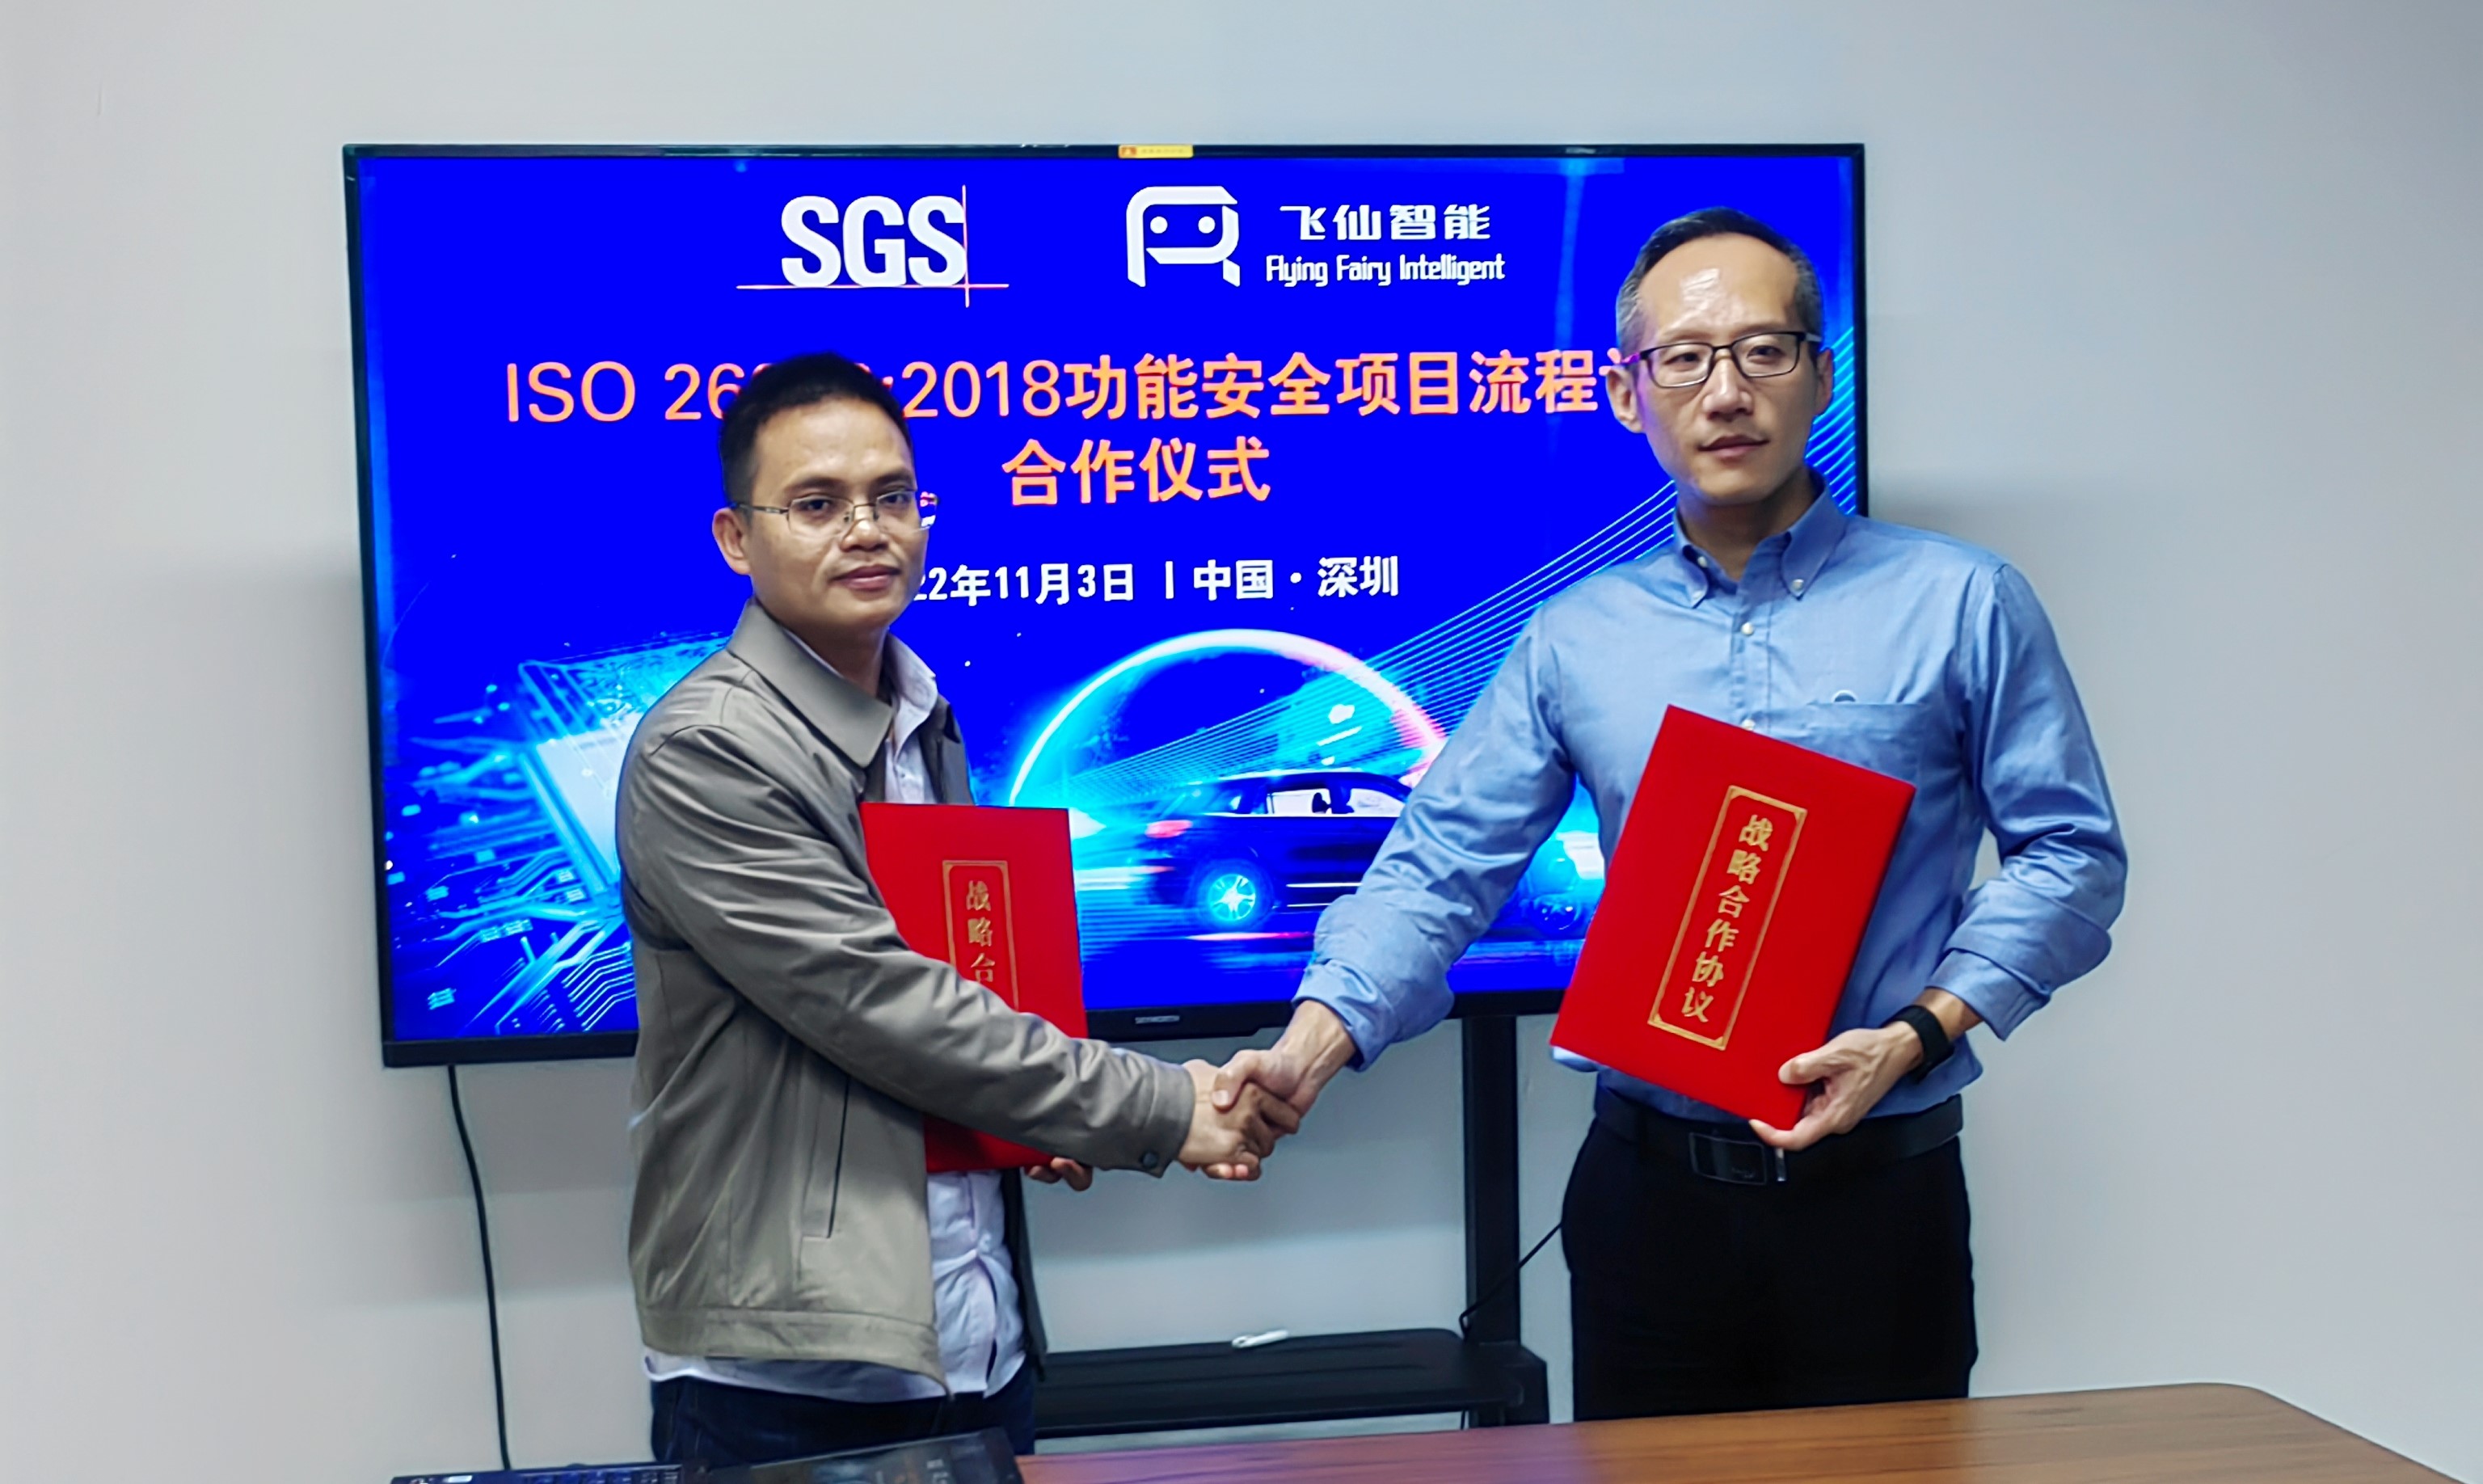 SGS and Flying Fairy Intelligent Reached The Cooperation of ISO 26262 : 2018 Automotive Functional Safety Certification.